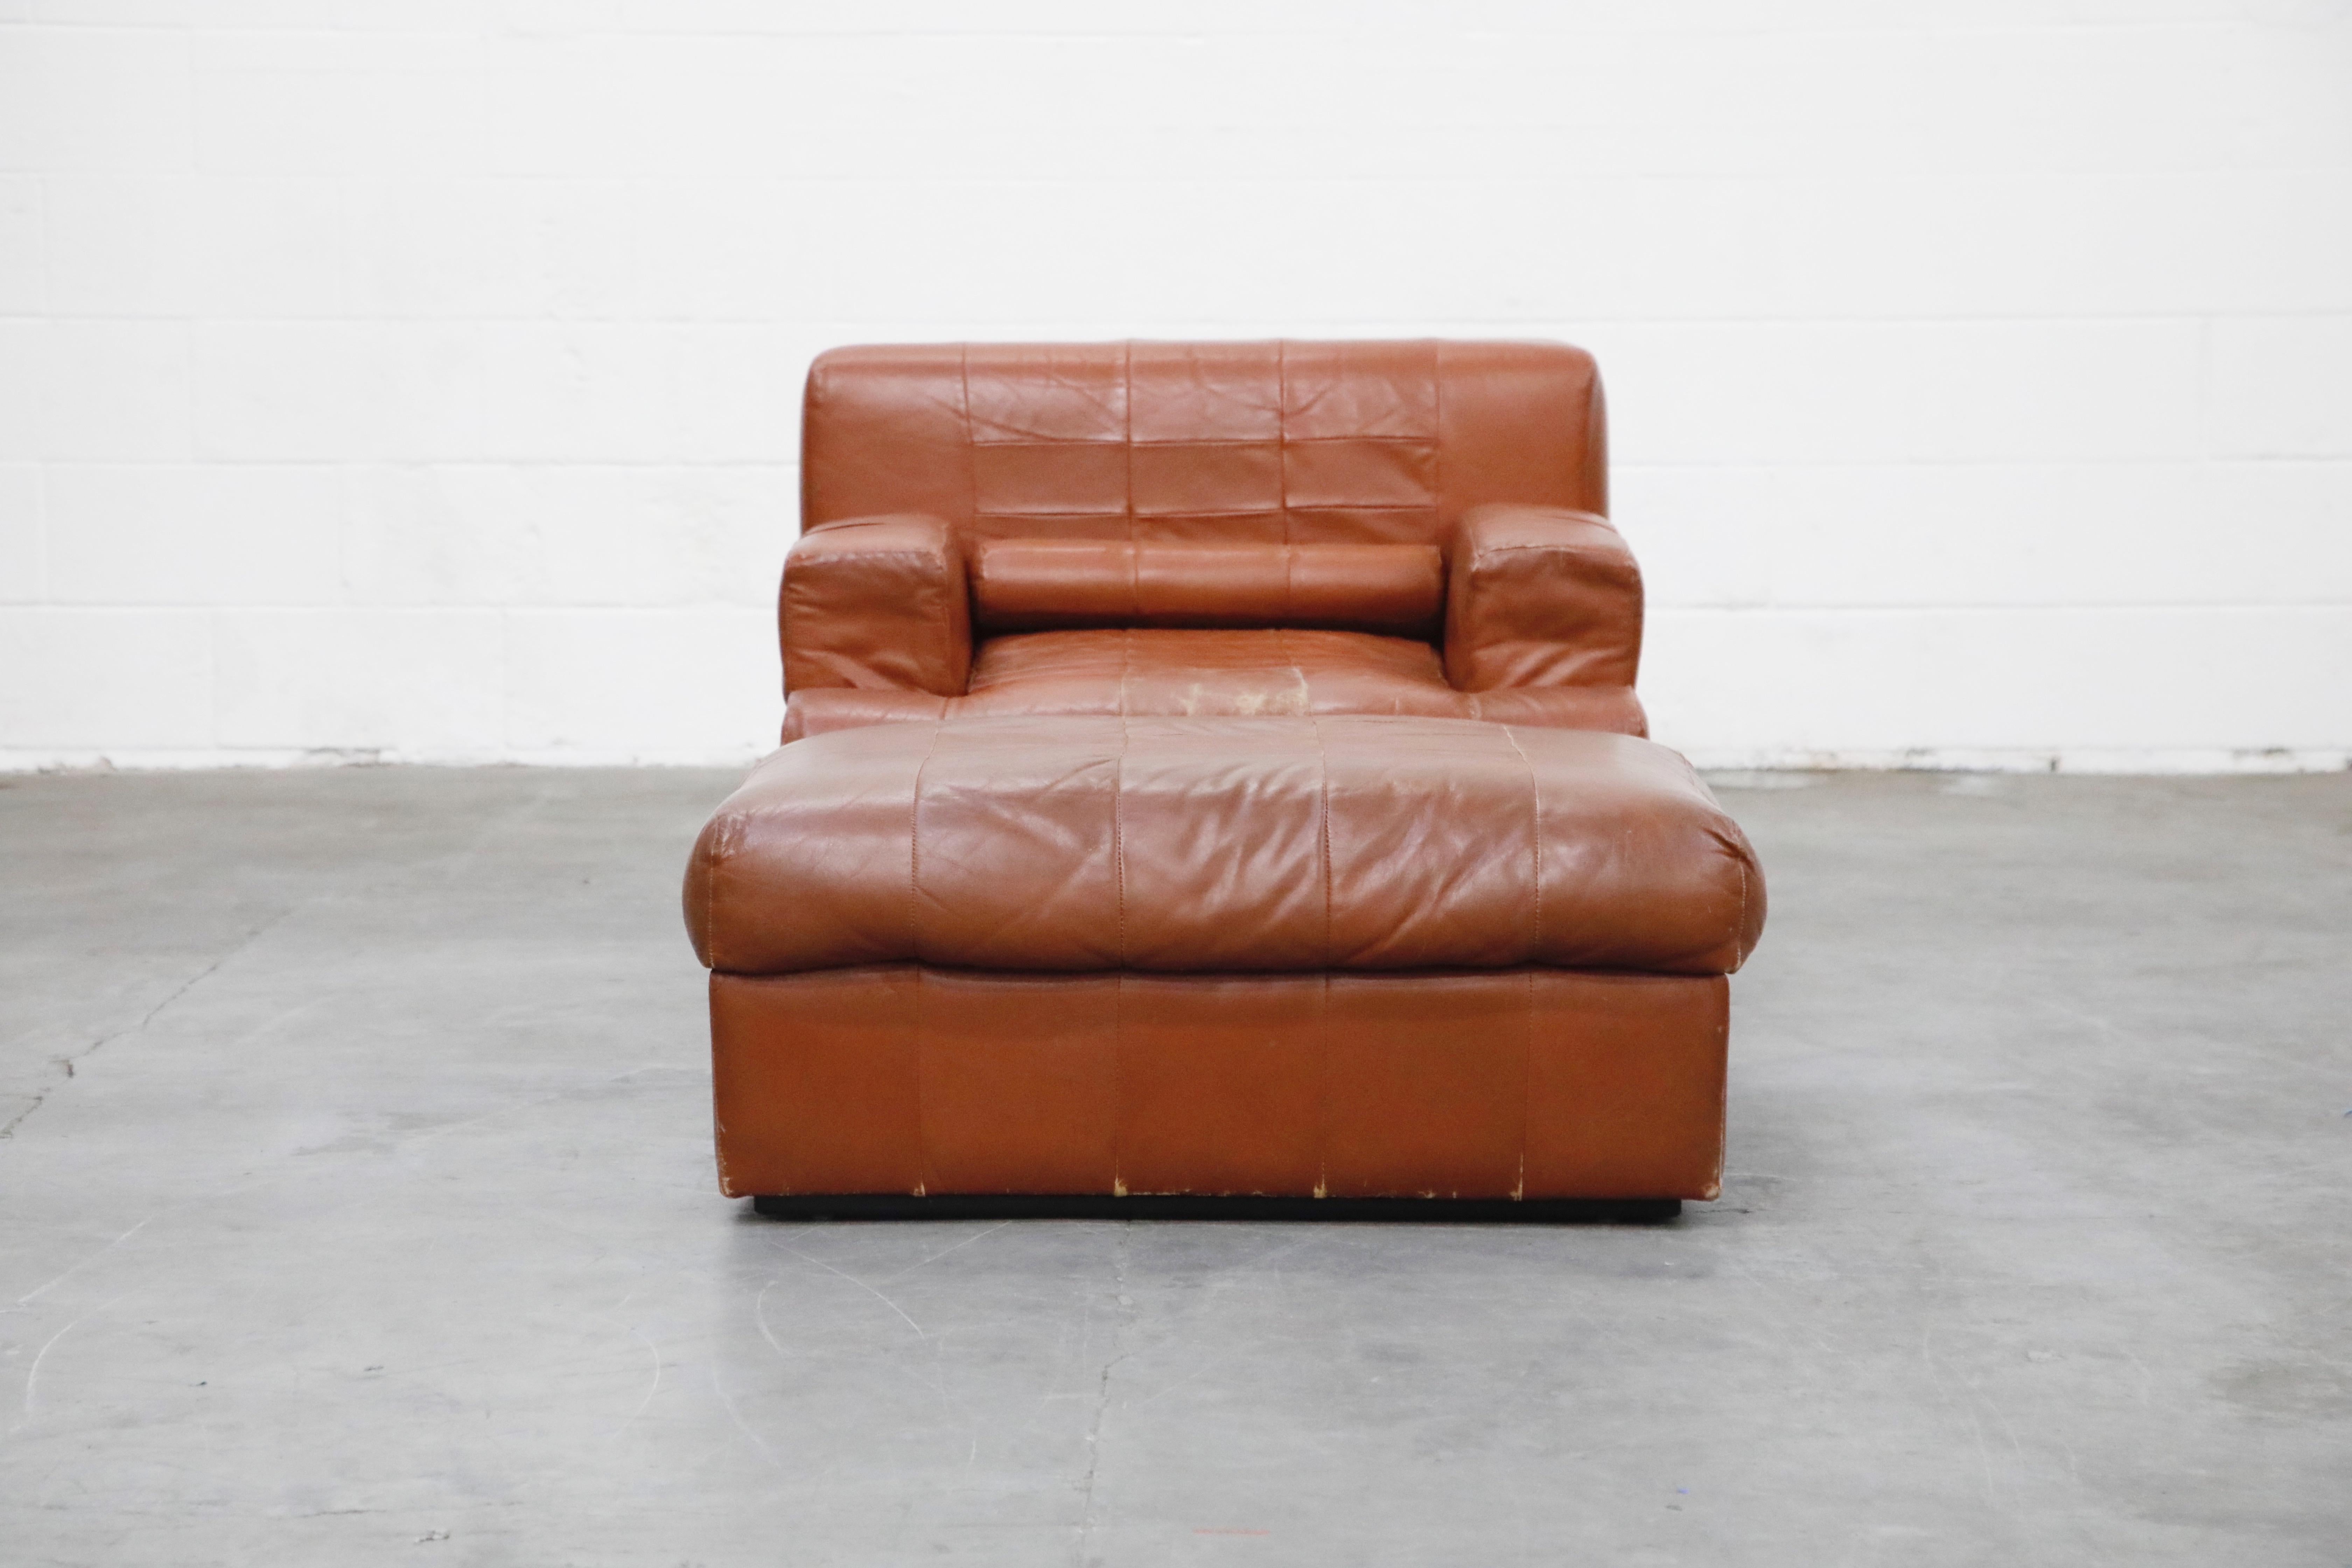 An impressive cognac colored leather lounge chair and ottoman by Brazilian designer Percival Lafer, with original labels, circa 1960 in original leather with moderate attractive patina and features a unique ability for the arms to transform up or